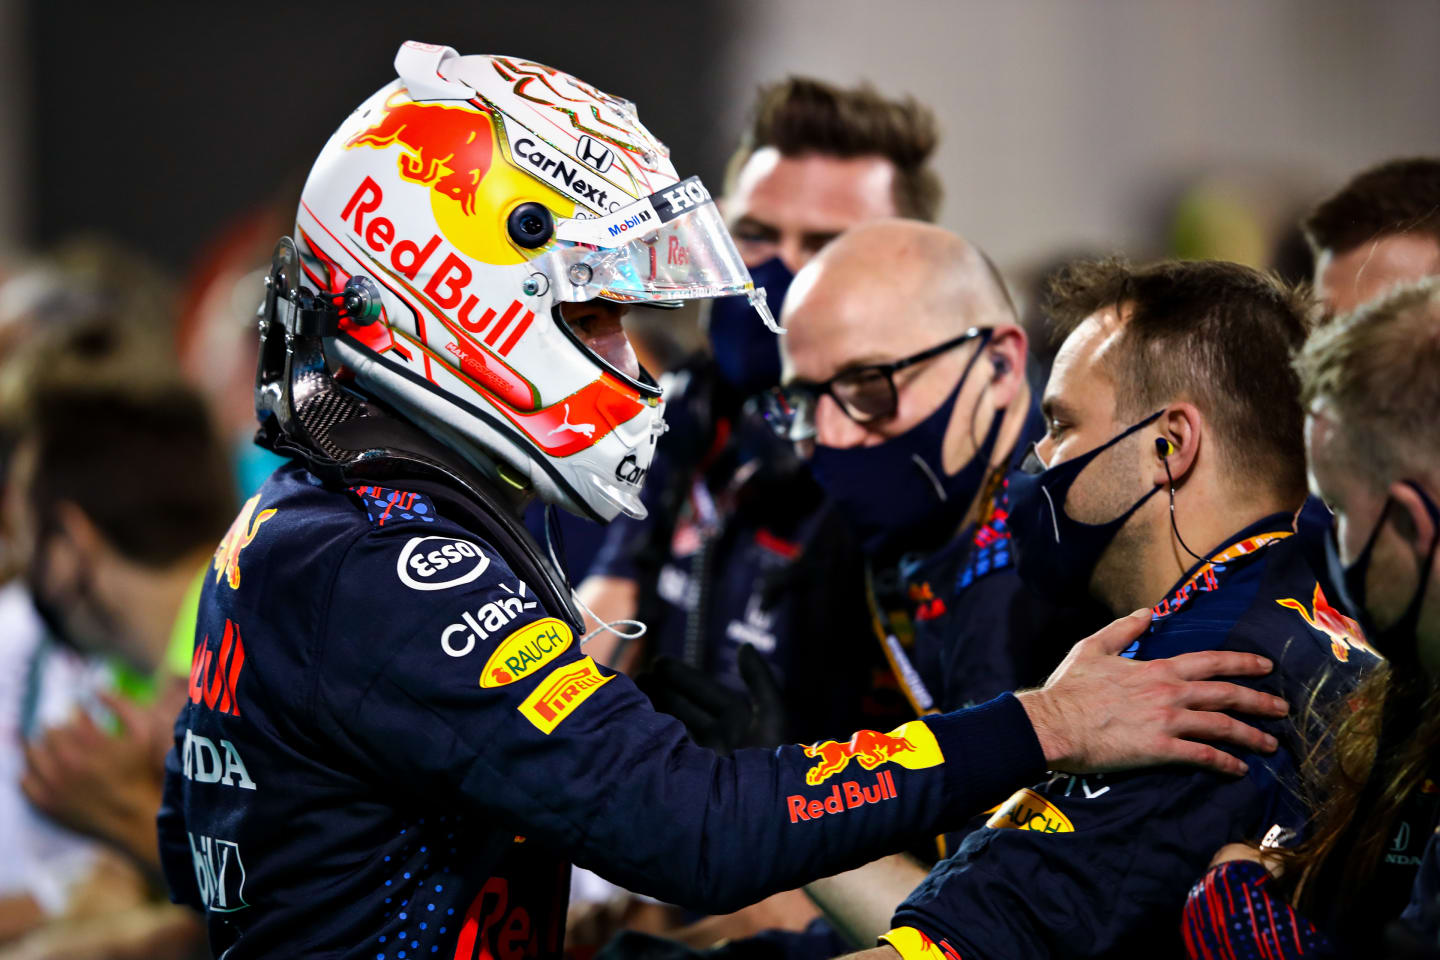 BAHRAIN, BAHRAIN - MARCH 28: Second placed Max Verstappen of Netherlands and Red Bull Racing celebrates in parc ferme during the F1 Grand Prix of Bahrain at Bahrain International Circuit on March 28, 2021 in Bahrain, Bahrain. (Photo by Mark Thompson/Getty Images)